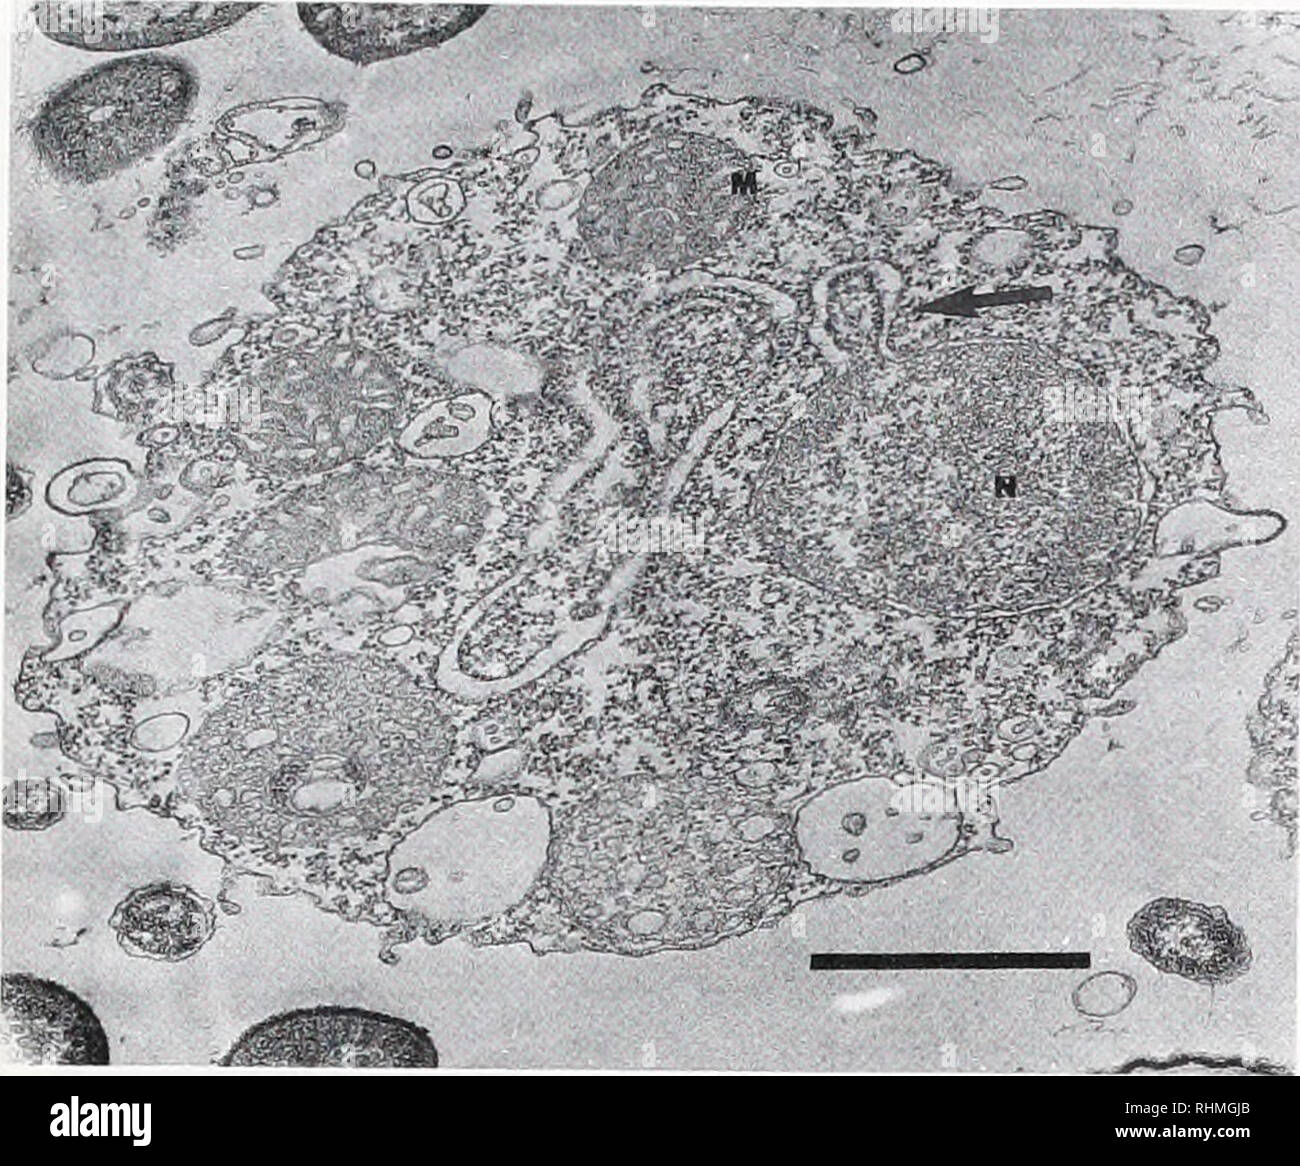 . The Biological bulletin. Biology; Zoology; Biology; Marine Biology. LIFE HISTORY OF P. JUGOSUS 123 -.^a^r. Figure 11. Amoeba with small bleb (arrow) off nucleus (N). Mito- chondria (M) are also seen; chromatin bodies are lacking. TEM. Bar scale = 1.0 ^m. Nuclear fluorescent staining. In both DAPI and mith- ramycin-stained preparations, the nuclei of amoebae were clearly visible with epifluorescence microscopy (Fig. 5; 6A, B; 7E-H). Two stages of nuclear division were revealed: telophase (Fig. 5C, D; 6A, B) and meta- phase (Fig. 5A, B). Cytoplasmic DNA was also seen in these preparations alth Stock Photo